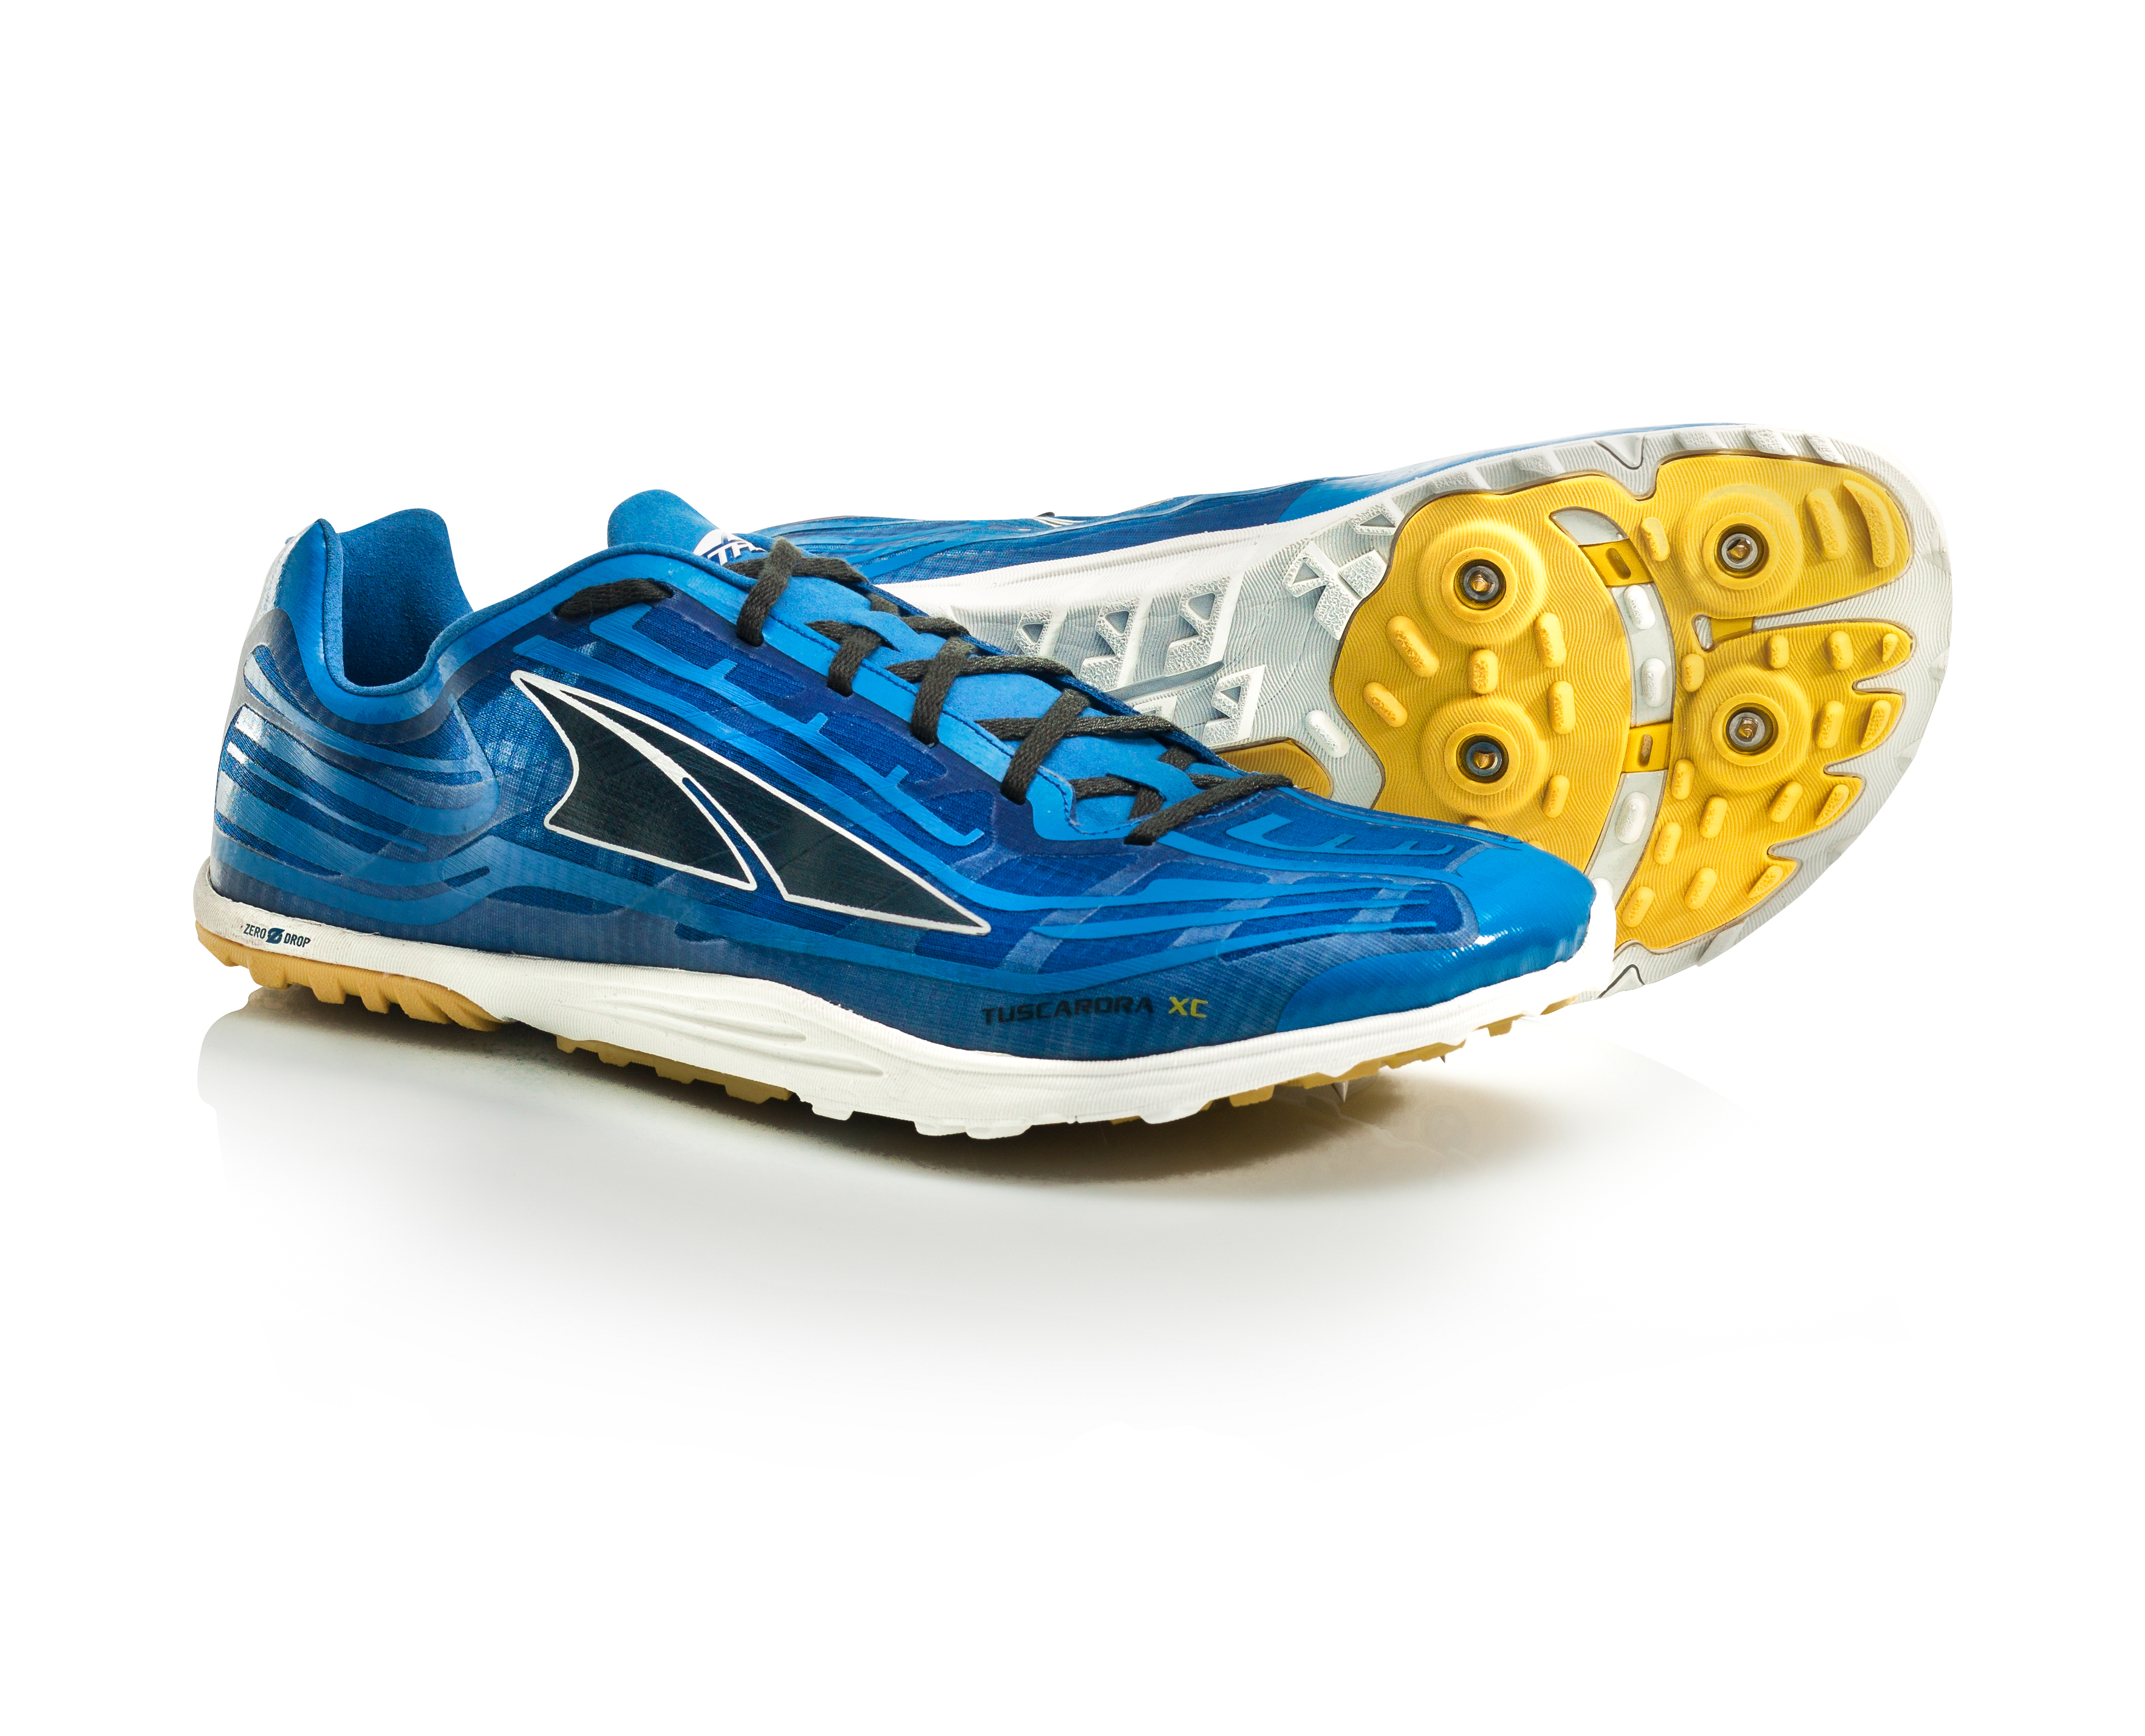 altra spikes